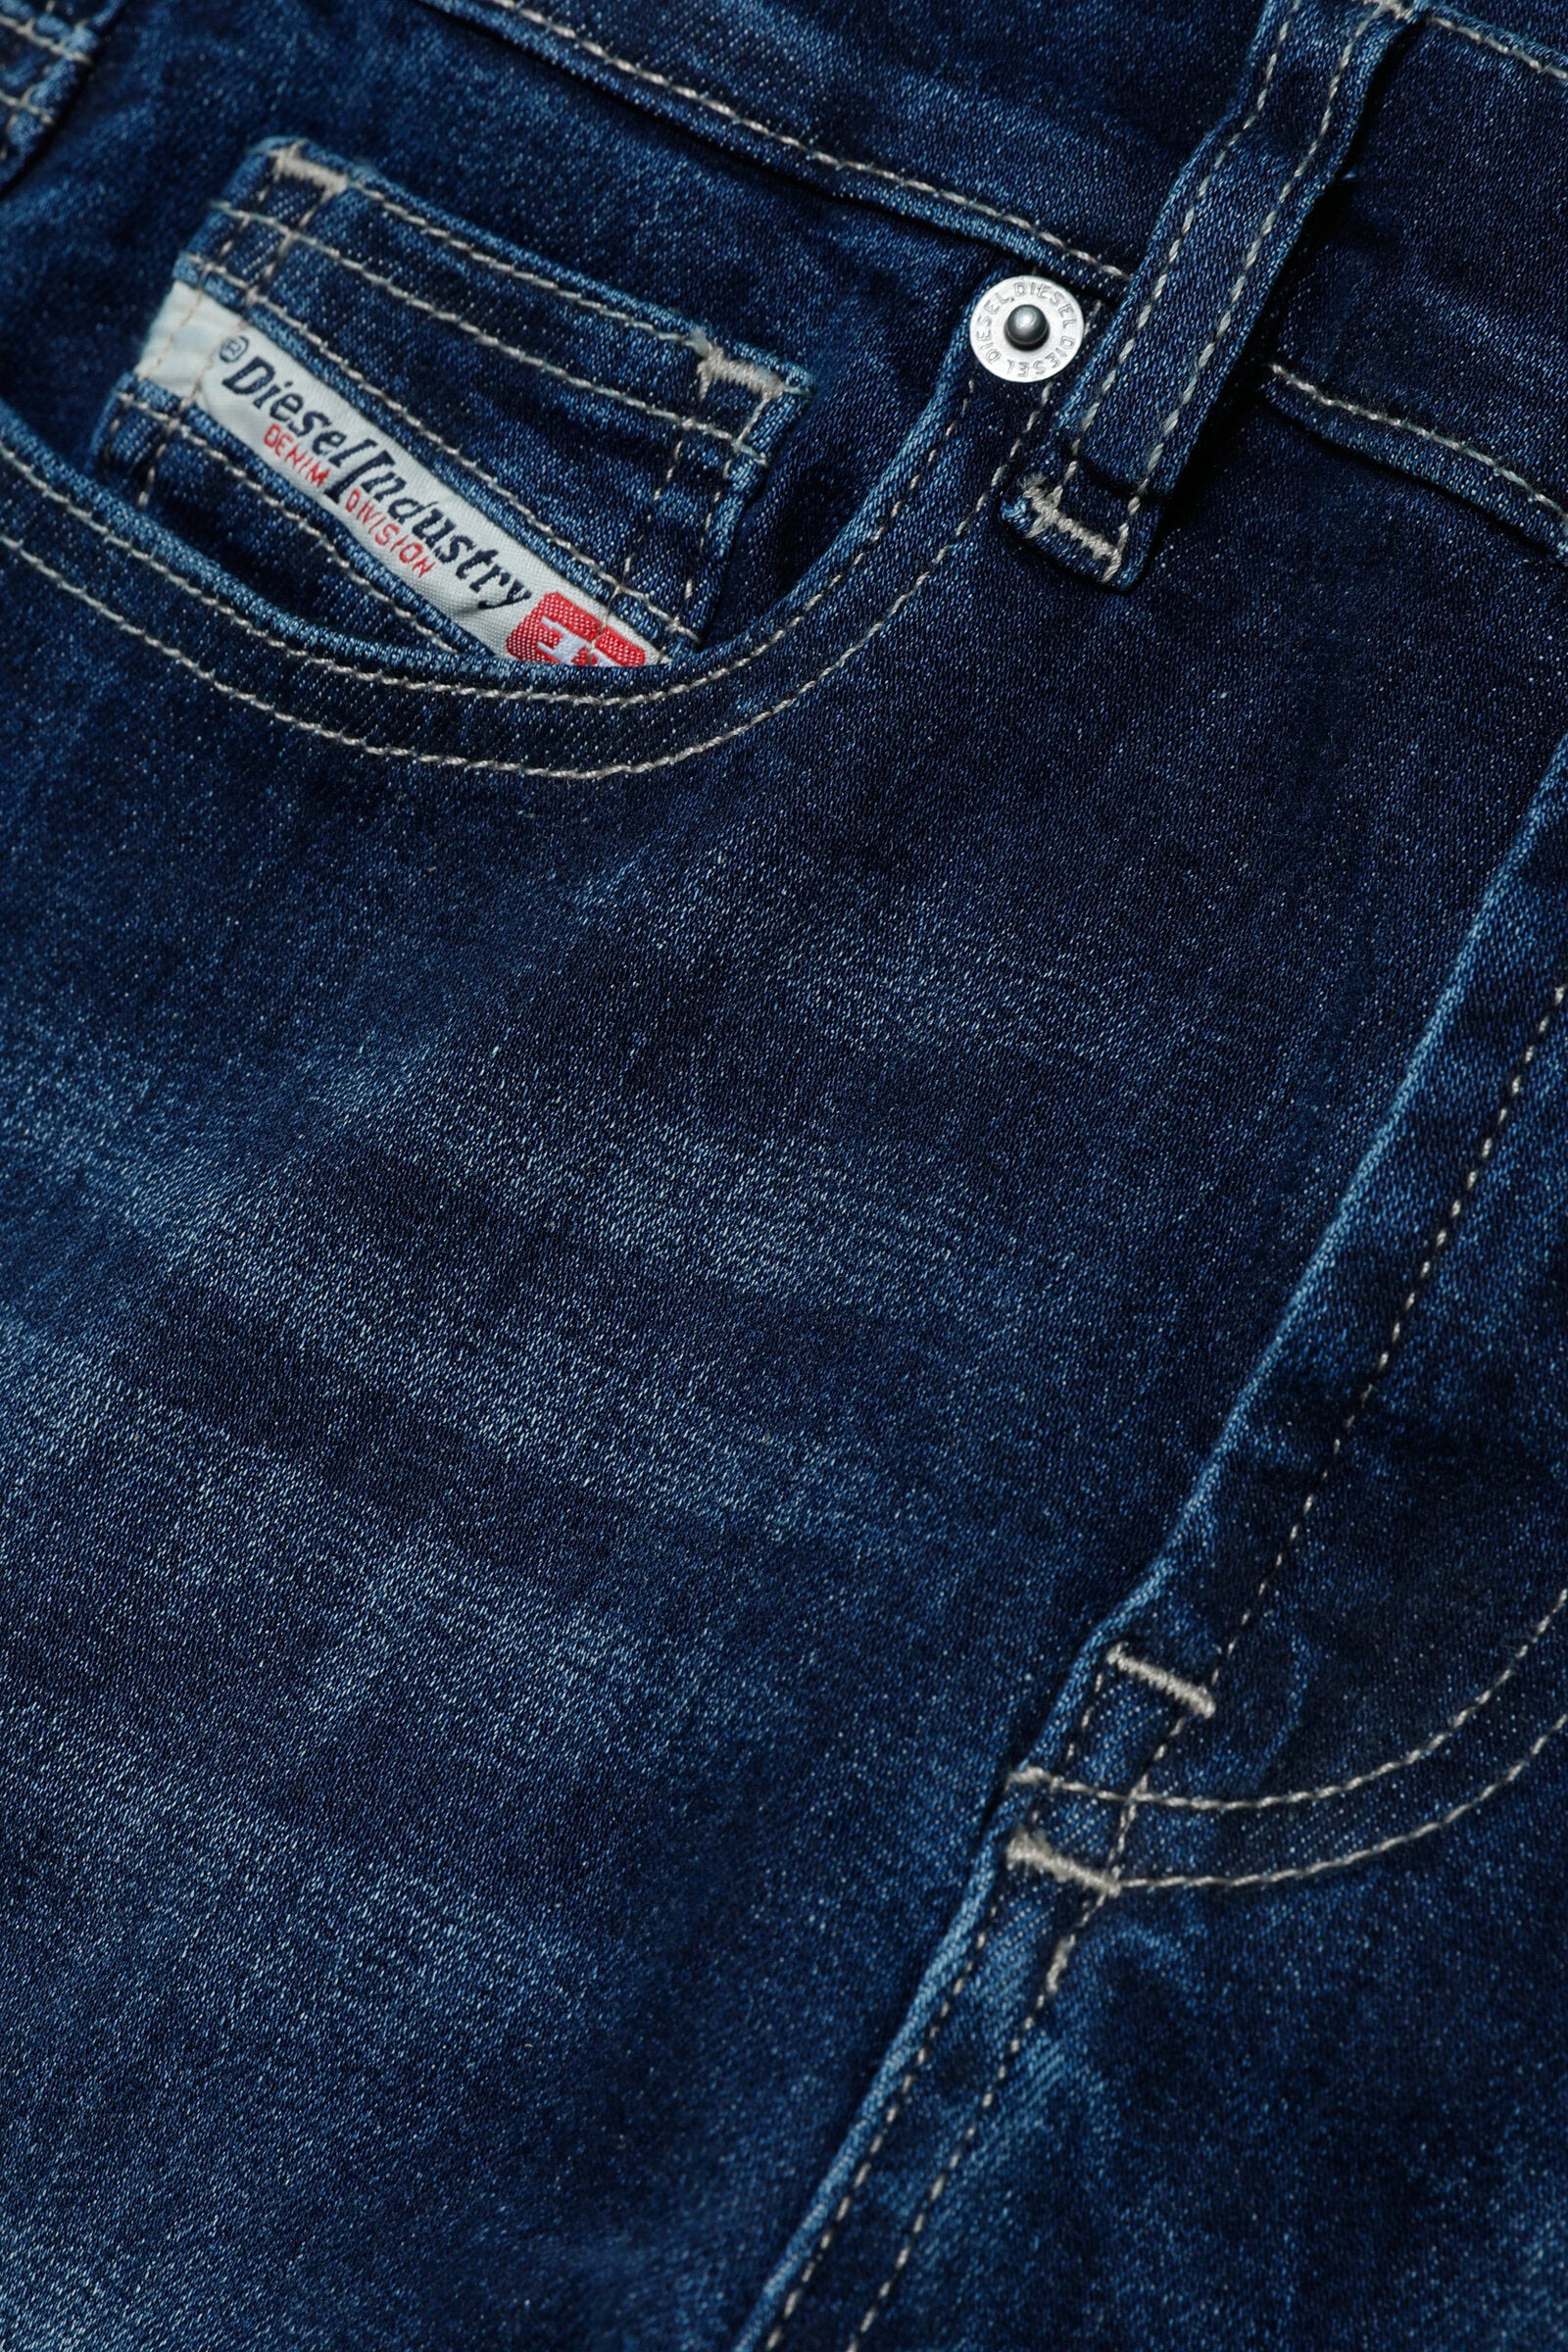 Jeans 2020 D-Viker straight dark blue with abrasions